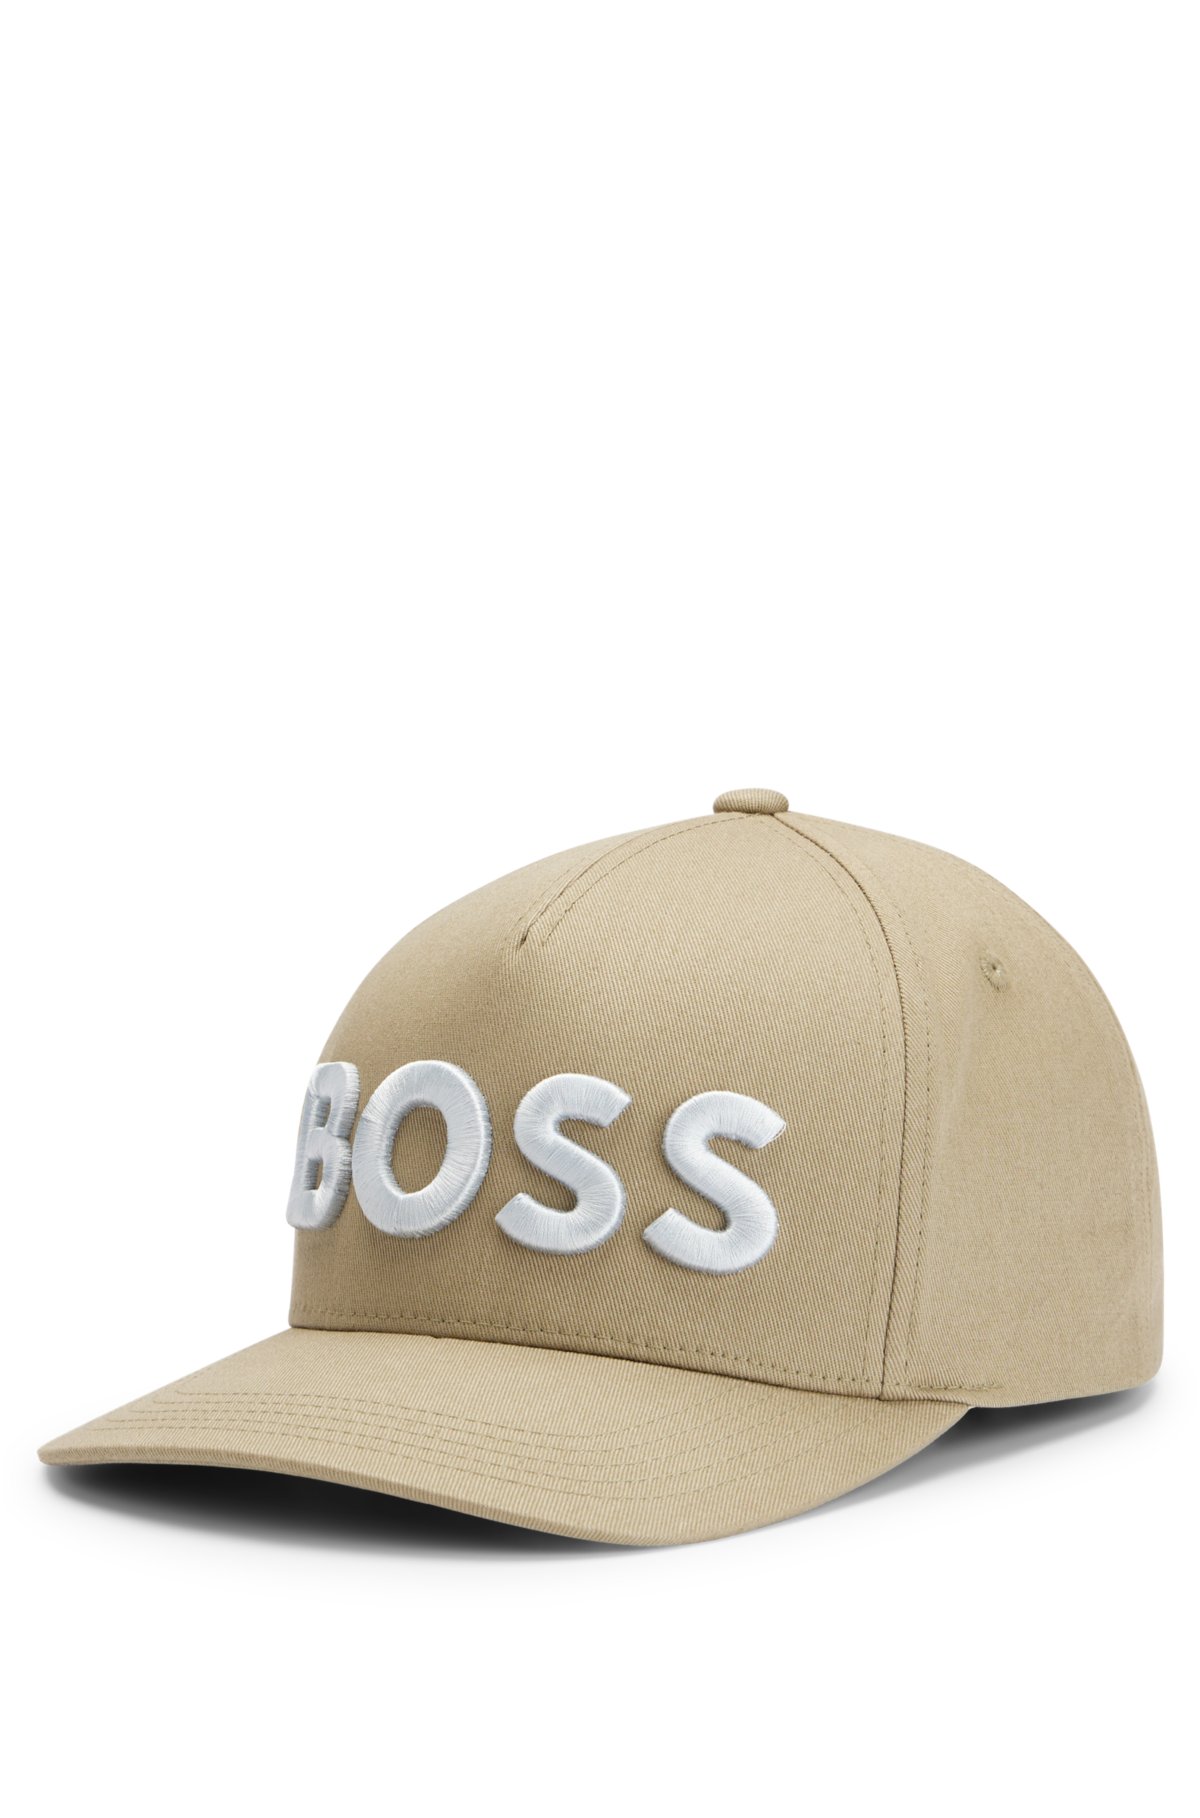 cap adjustable embroidered Cotton-twill and BOSS with - logo strap